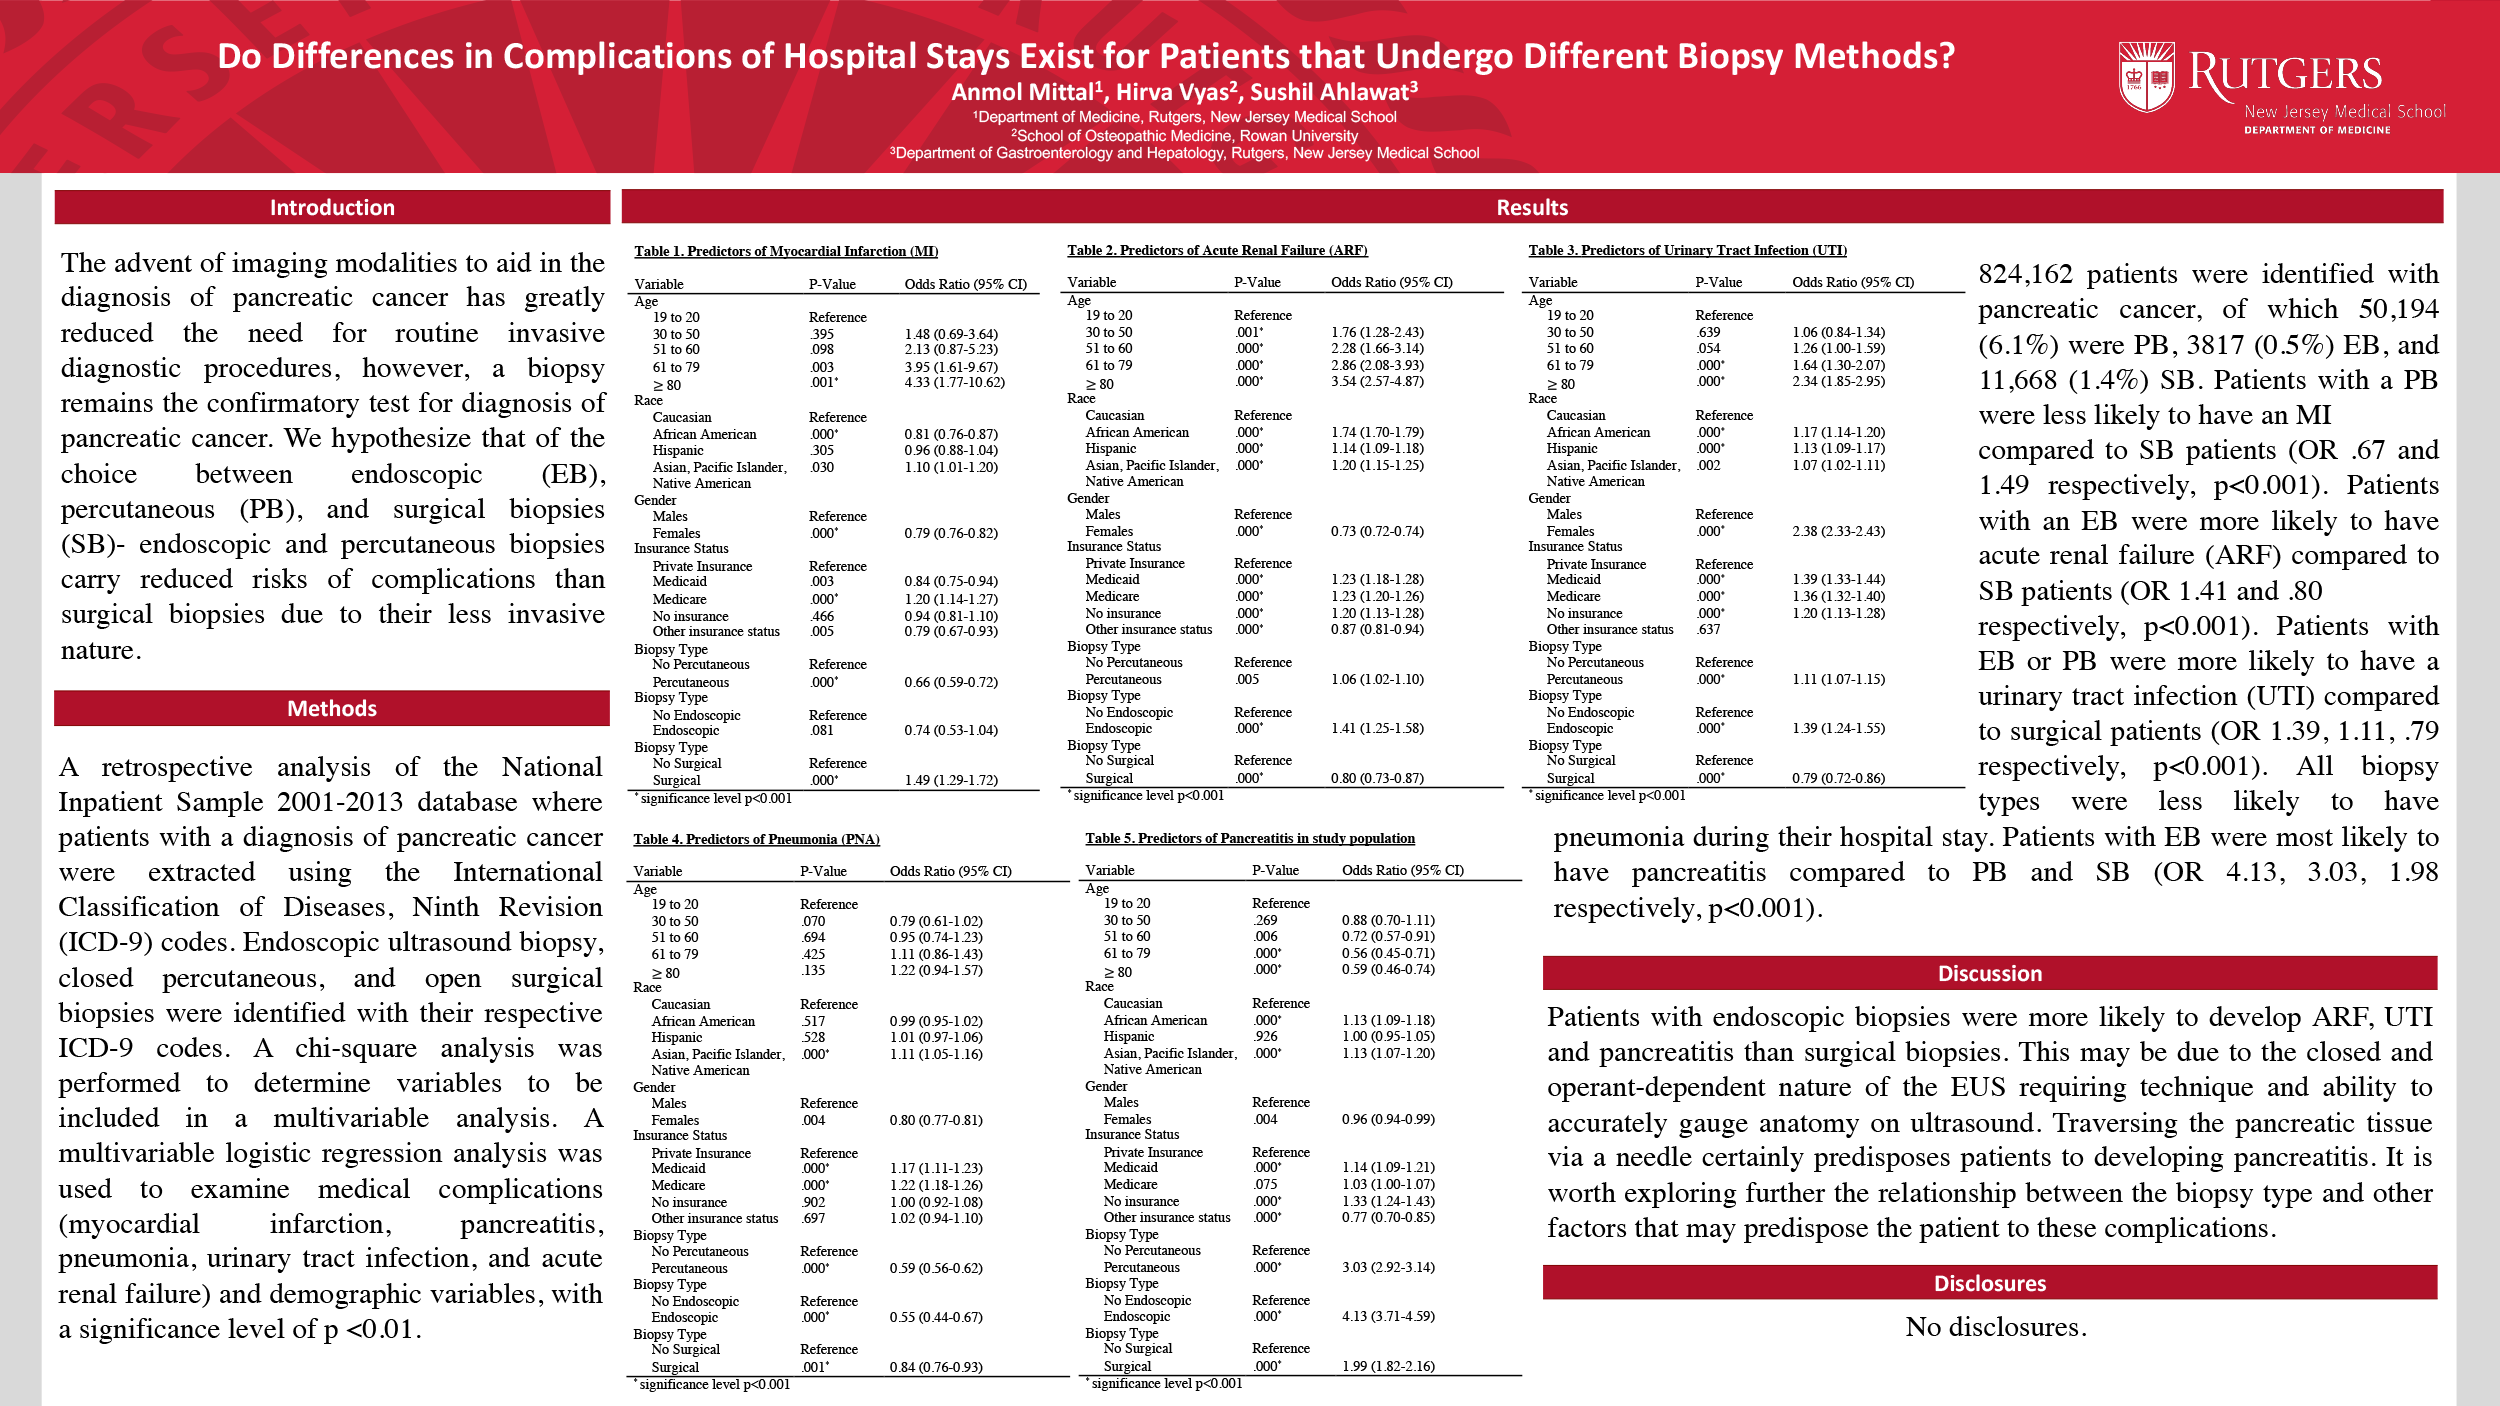 4-R-13-Do Differences in Complications of Hospital Stays Exist for Patients that Undergo_Biopsy